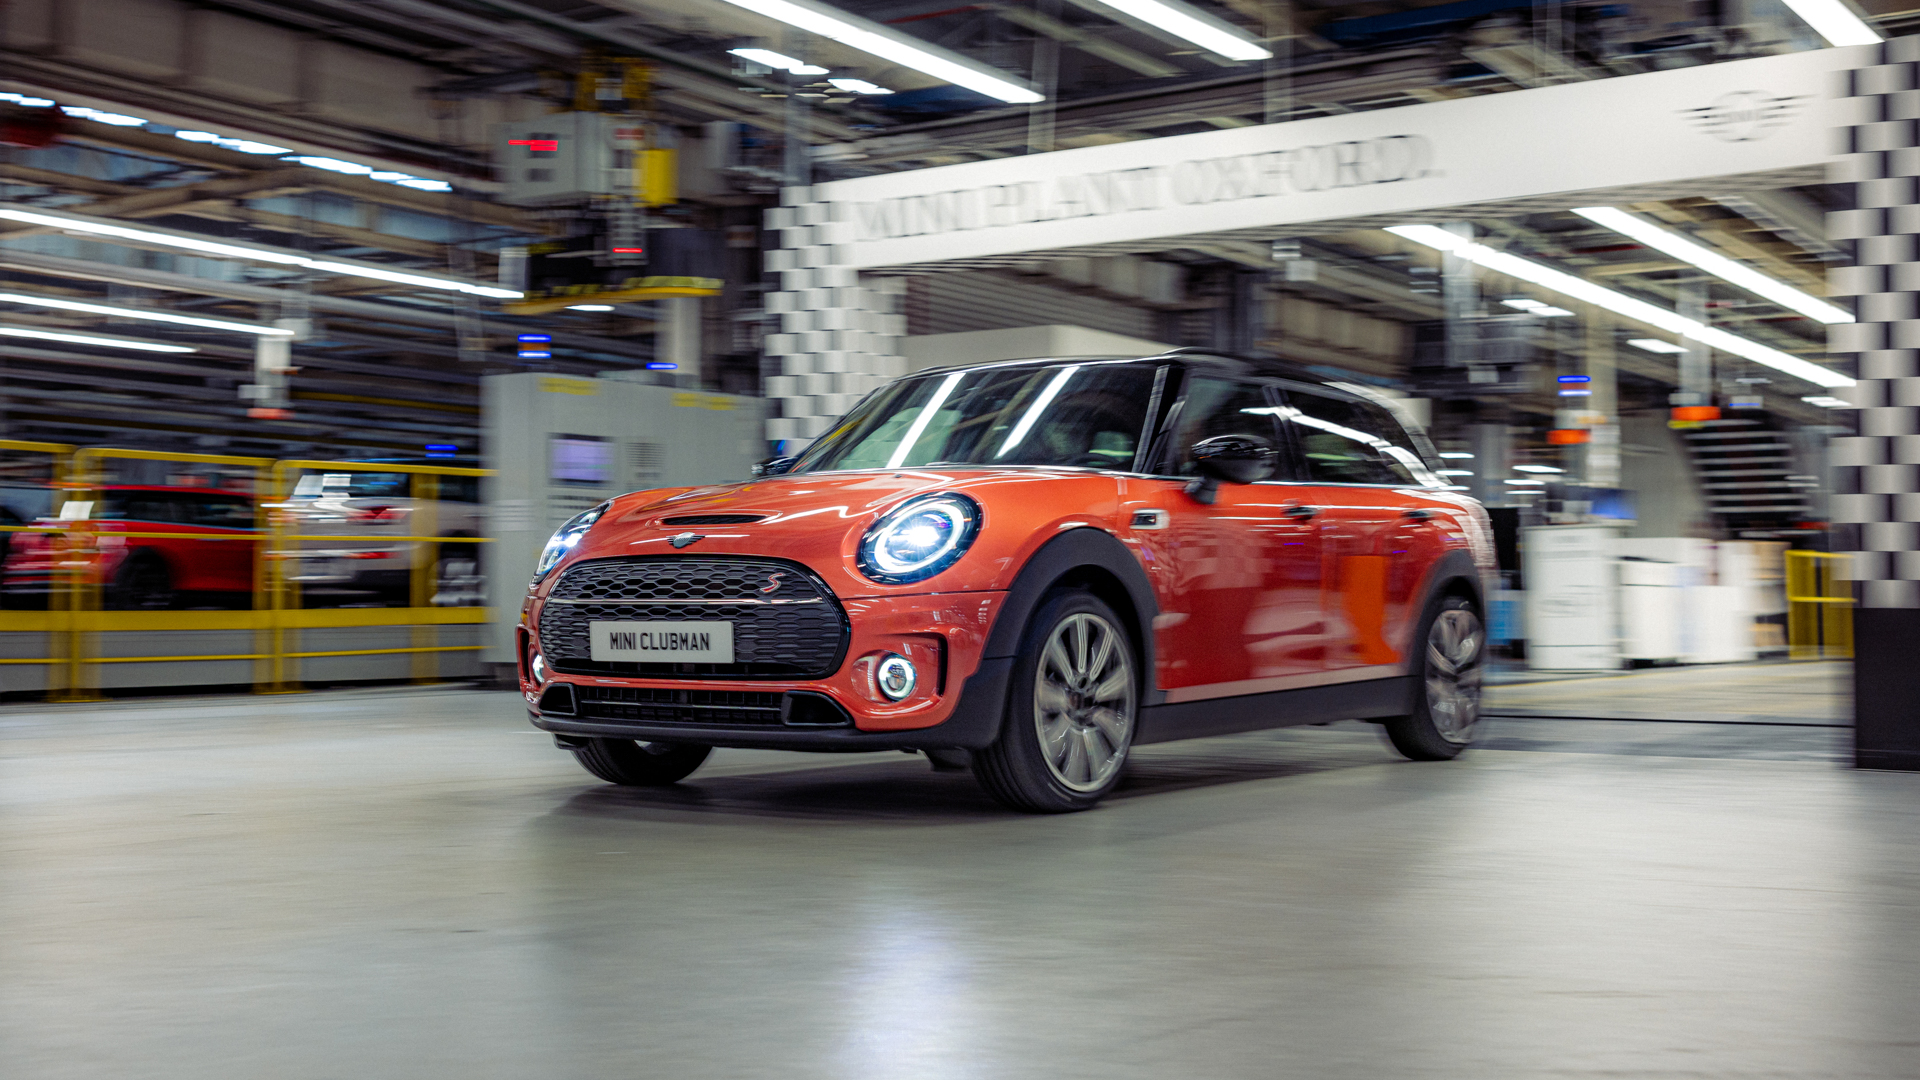 The Mini Clubman Is Dead and It's Taking Its Beloved Barn Doors With It